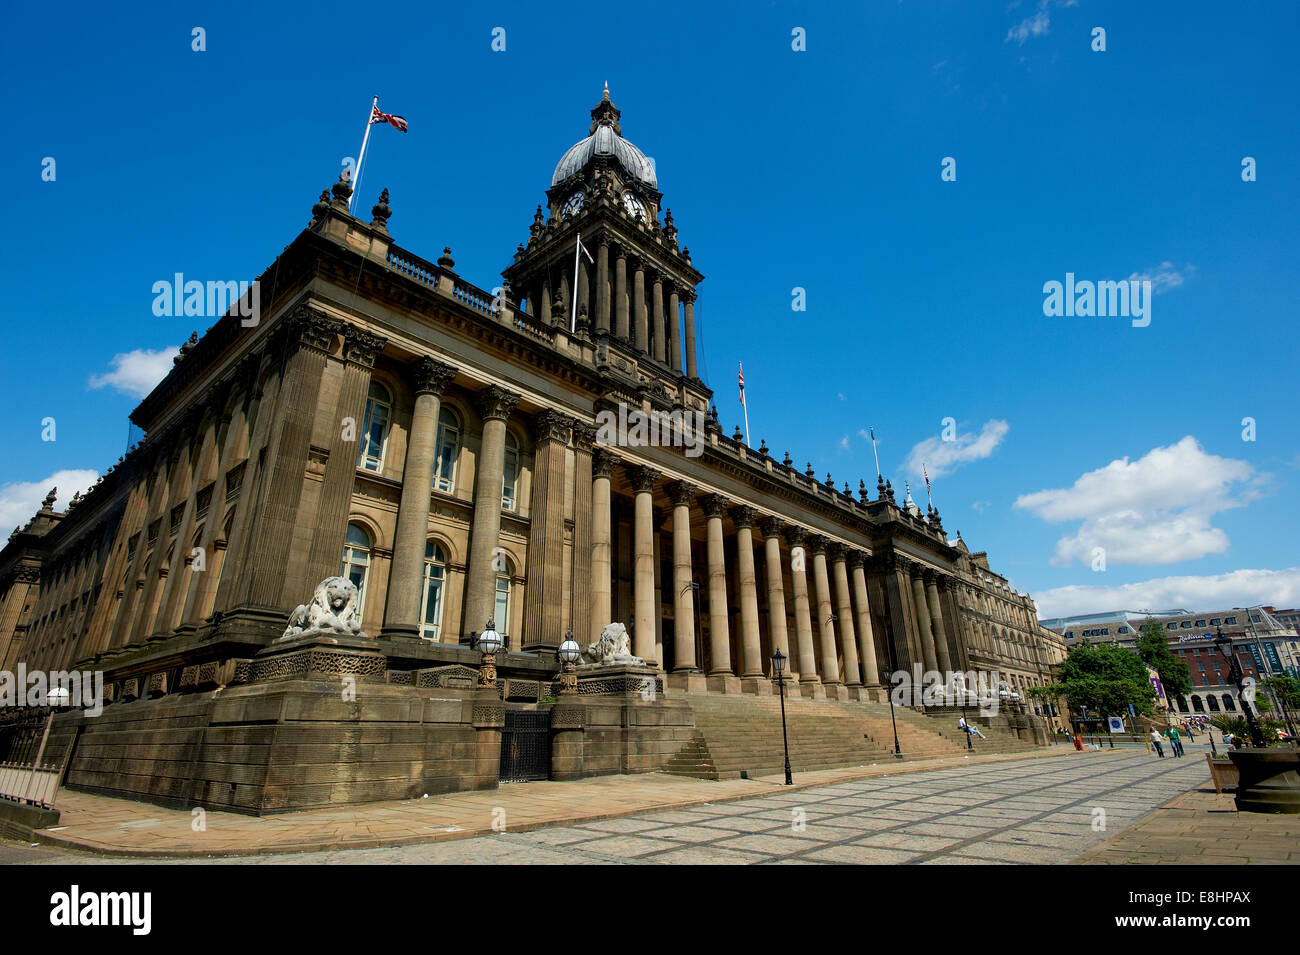 Leeds Town Hall, Leeds, West Yorkshire, Regno Unito. Foto Stock